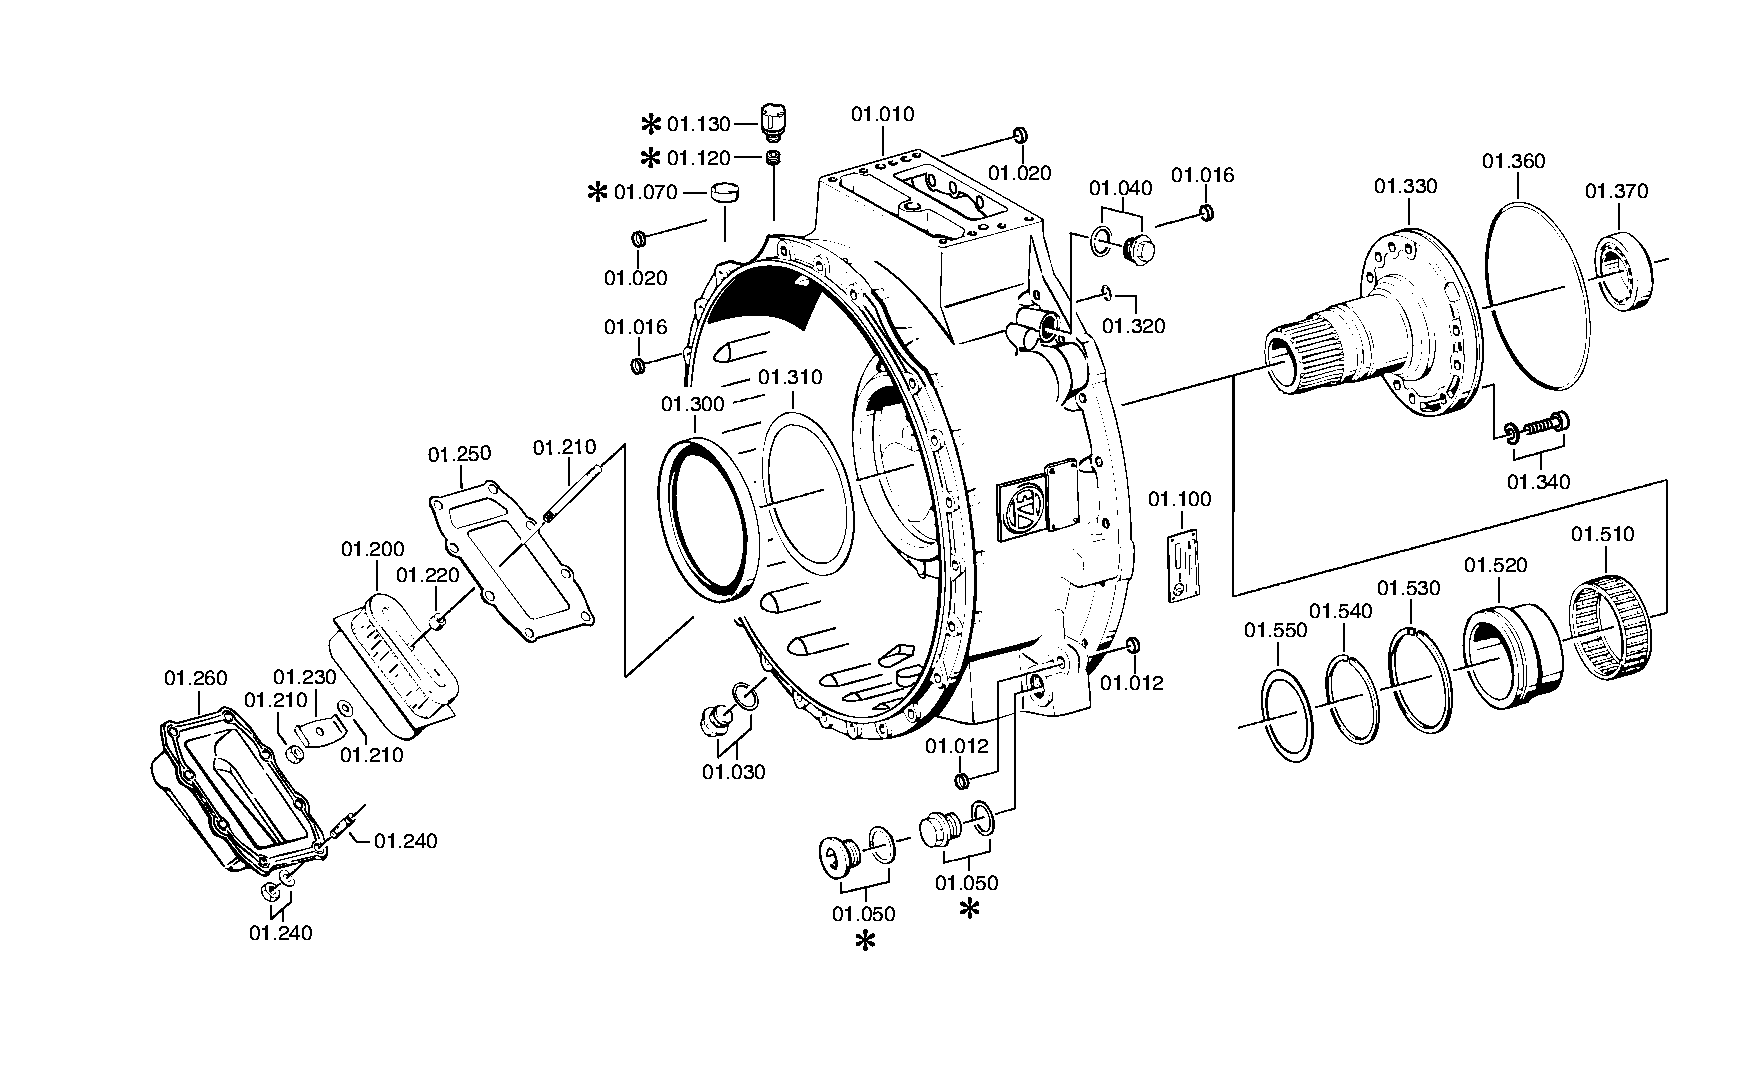 drawing for DAF 66985 - SPRING WASHER (figure 3)